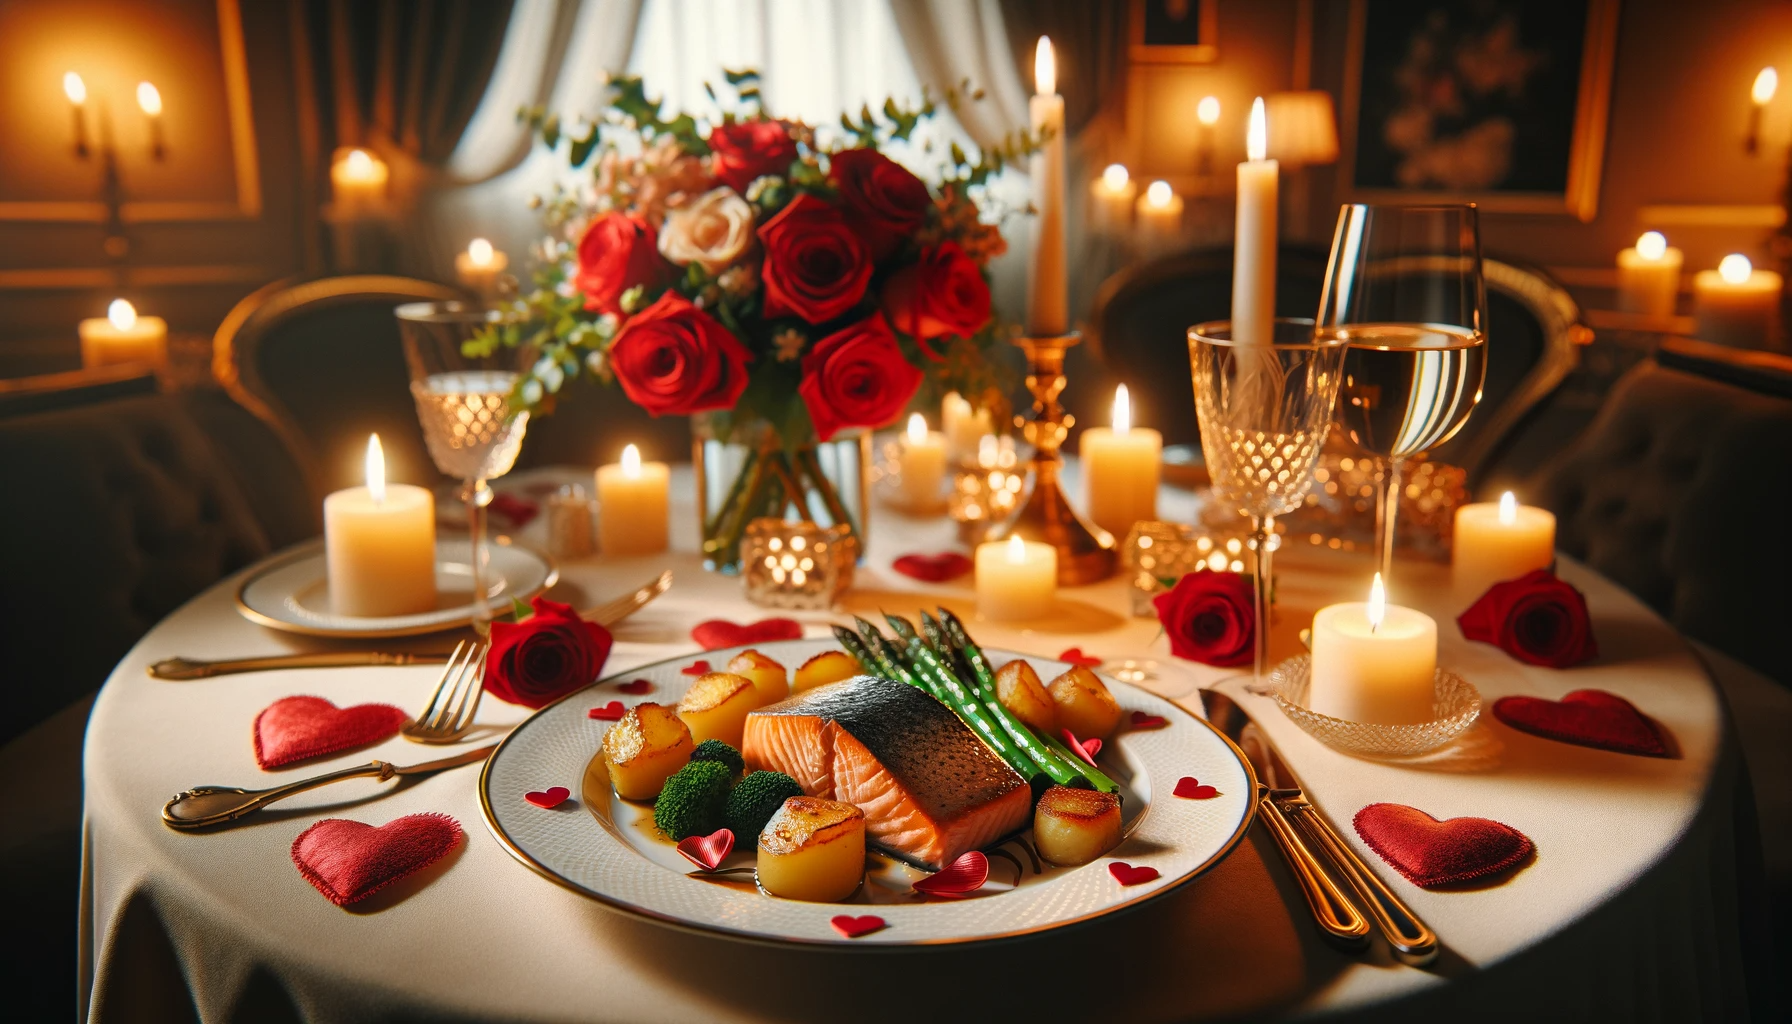 Valentine's Day Table setting with a salmon dish.